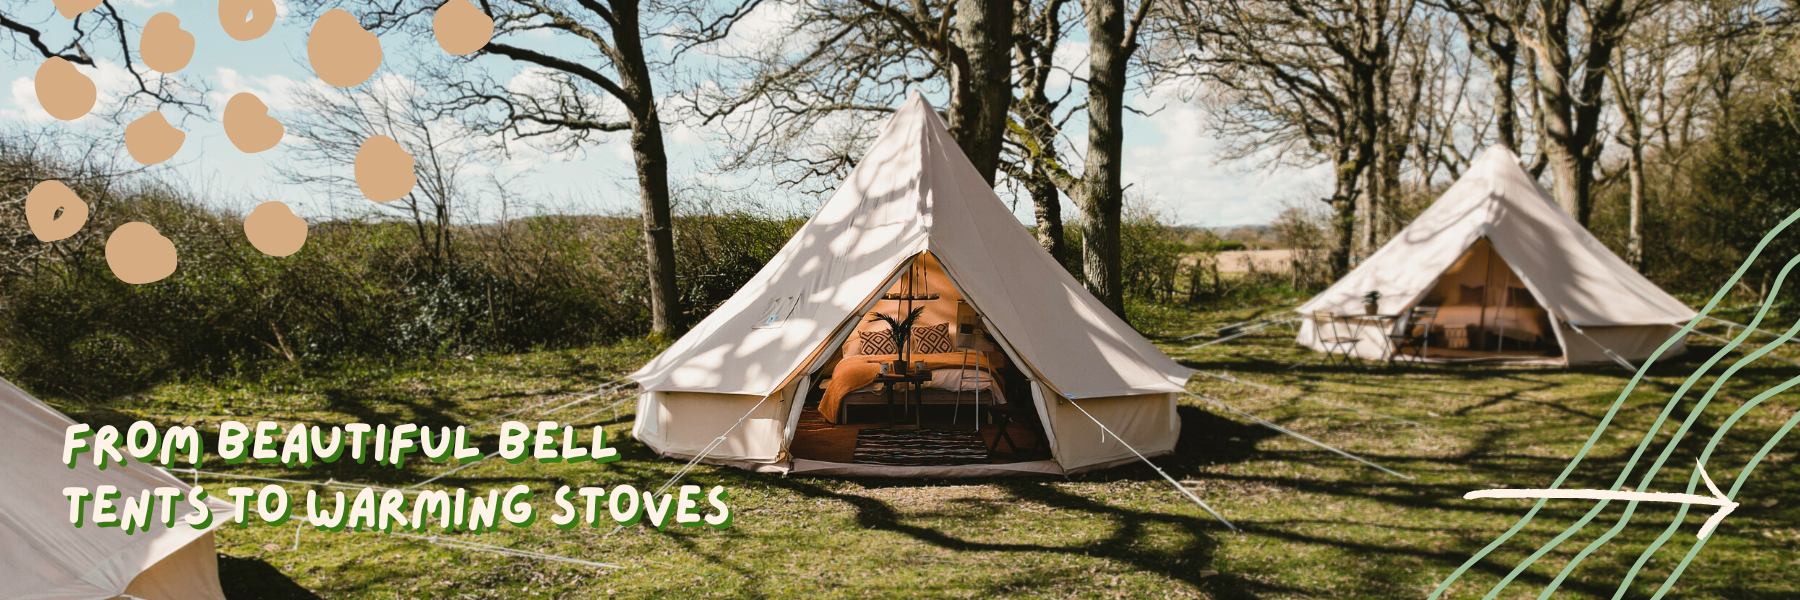 from beautiful bell tents to warm stoves